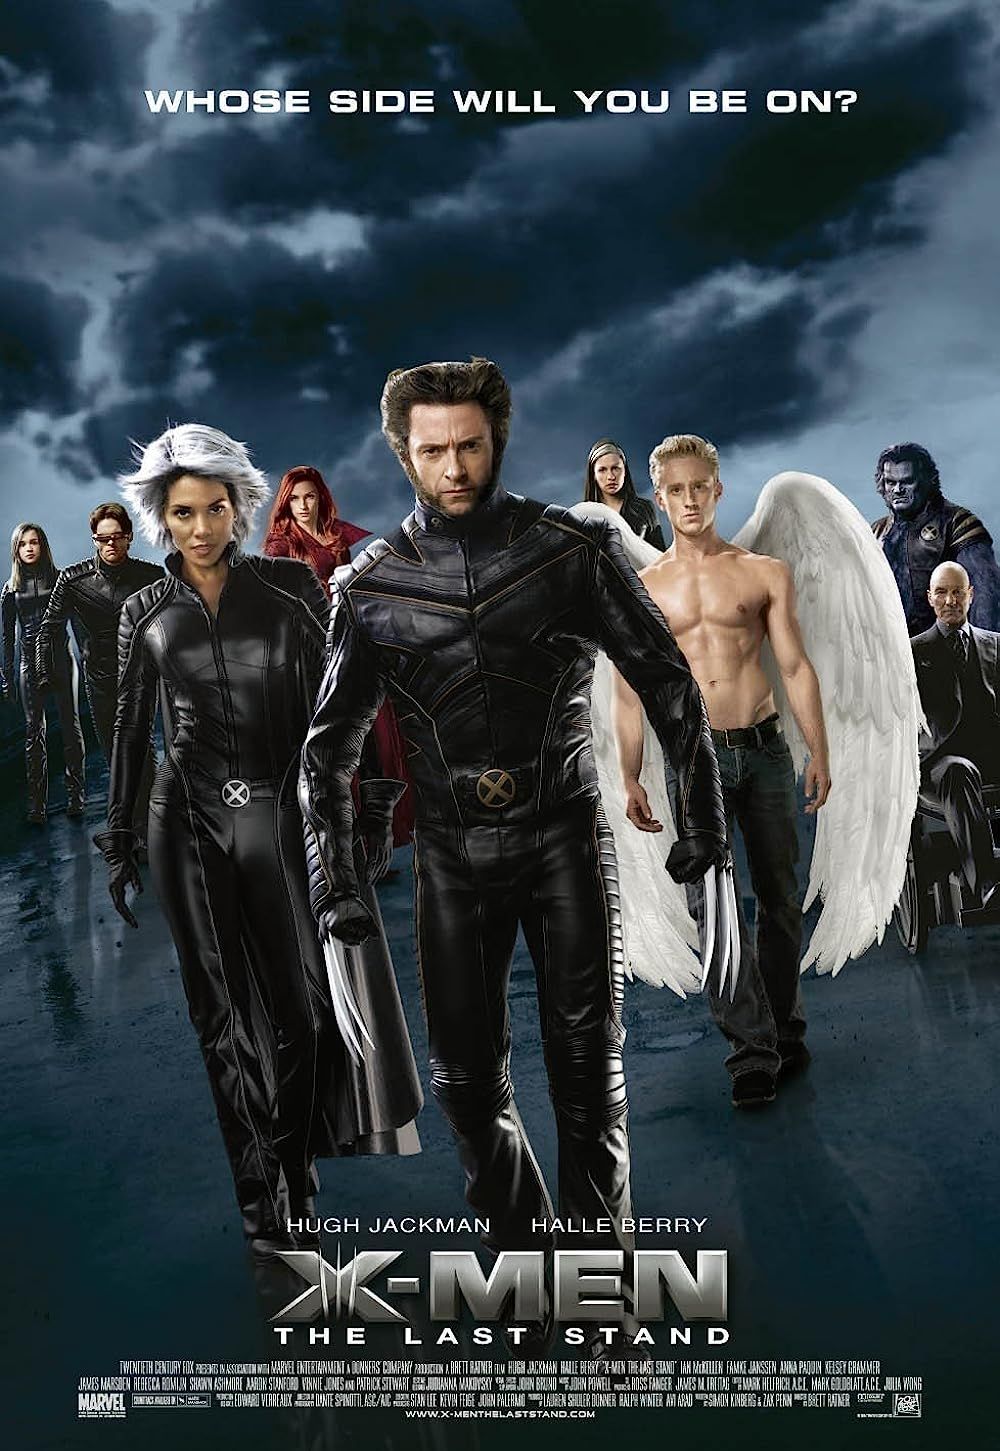 The cast lead by Wolverine and Storm walk towards the camera in front of a stormy sky on the X-Men The Last Stand Poster